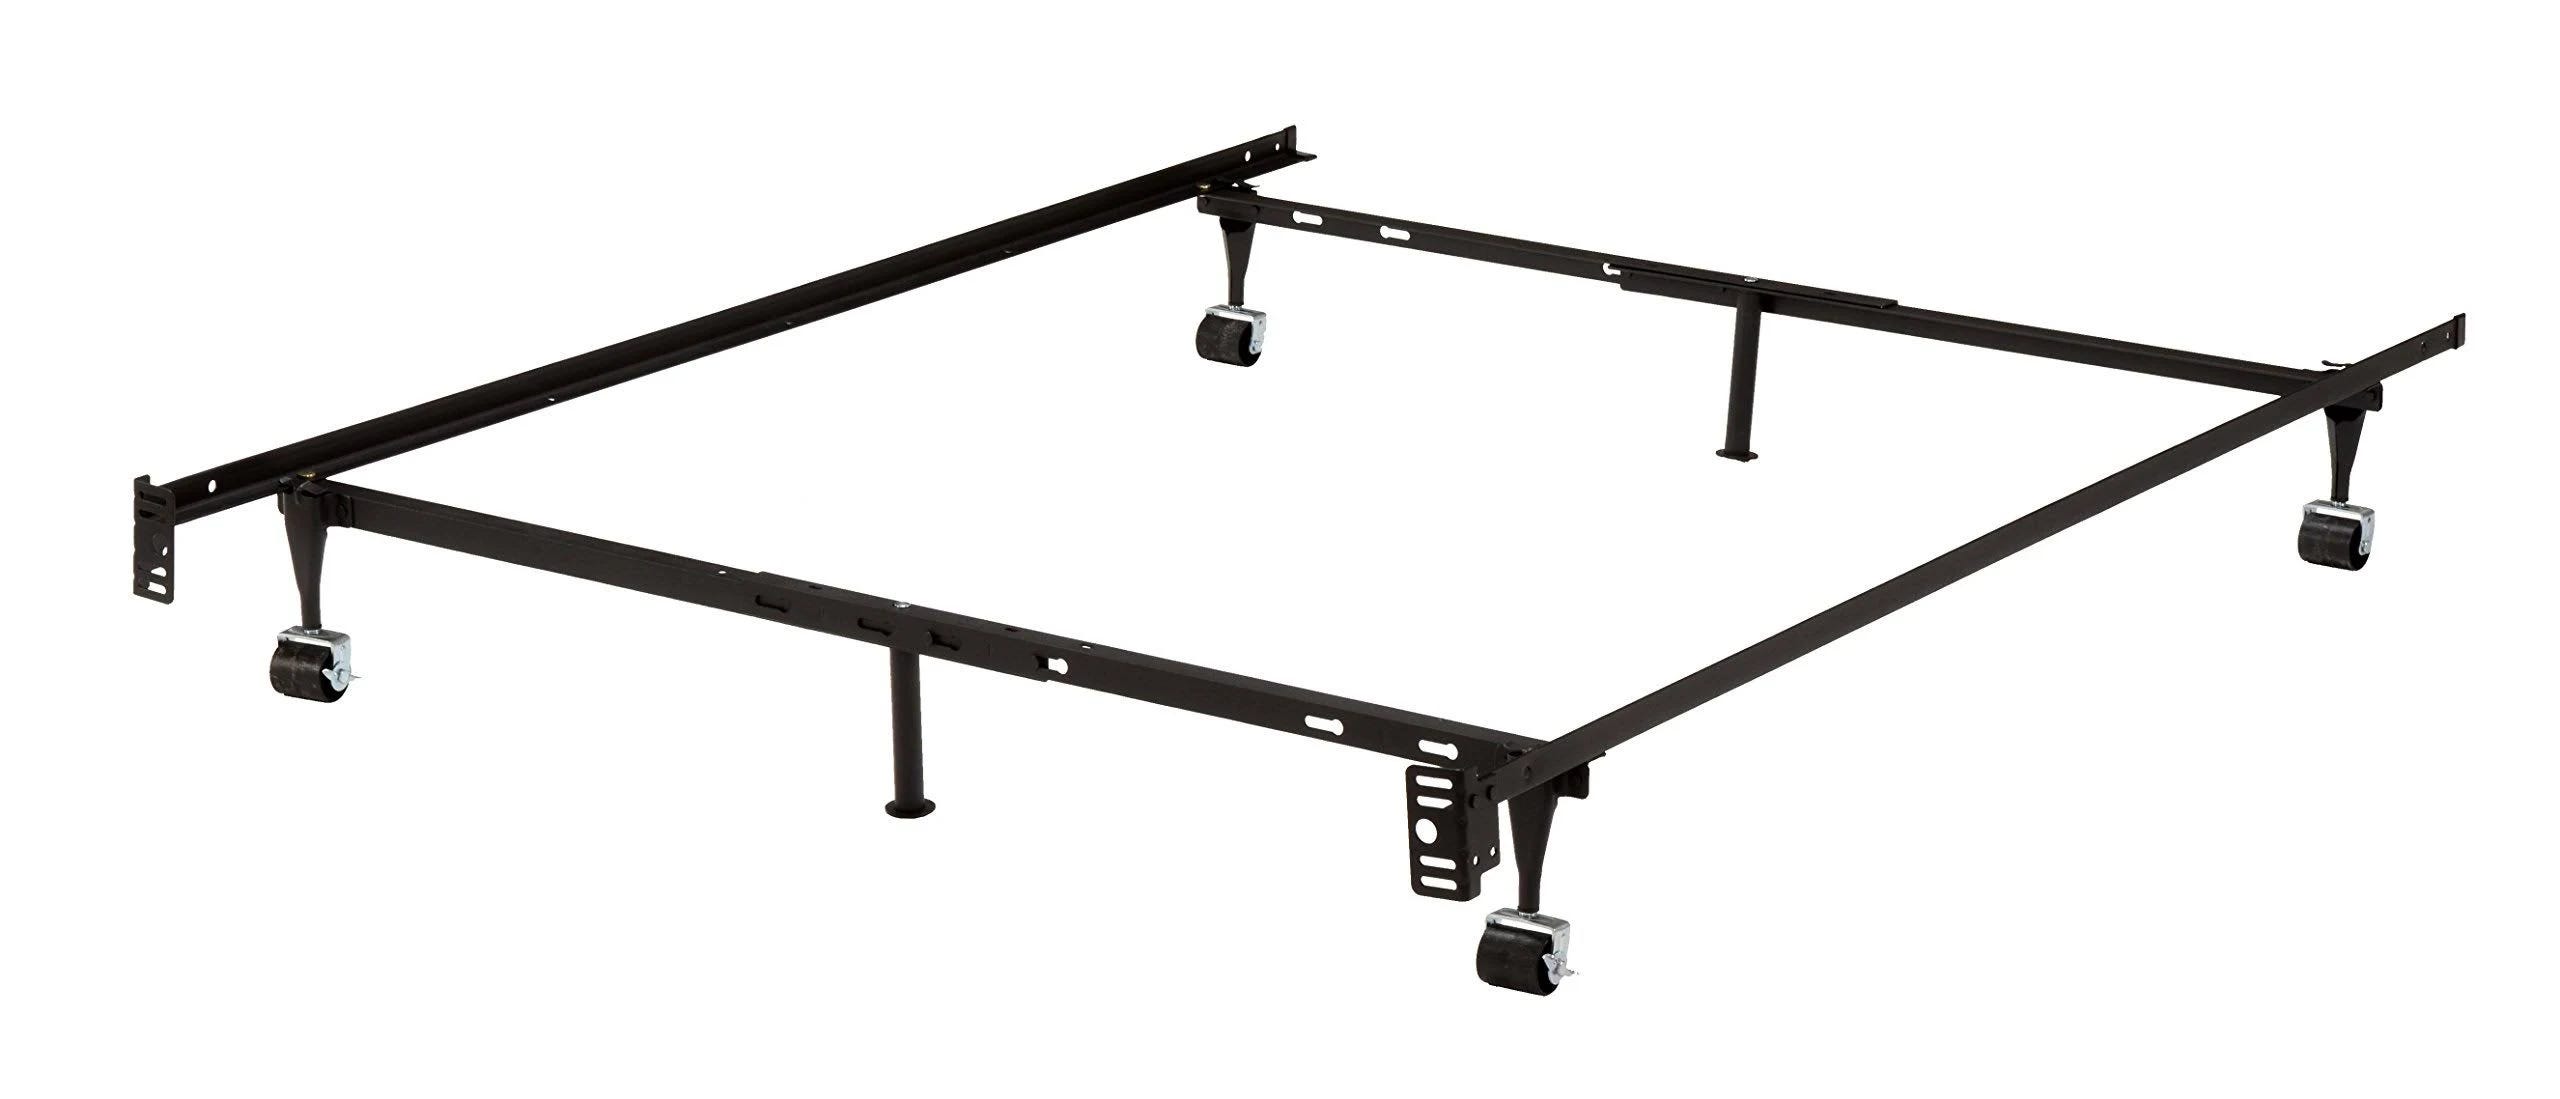 Easily Adjustable Full XL Metal Bed Frame - Black Finish, Convenient for Queen and Full Sizes | Image